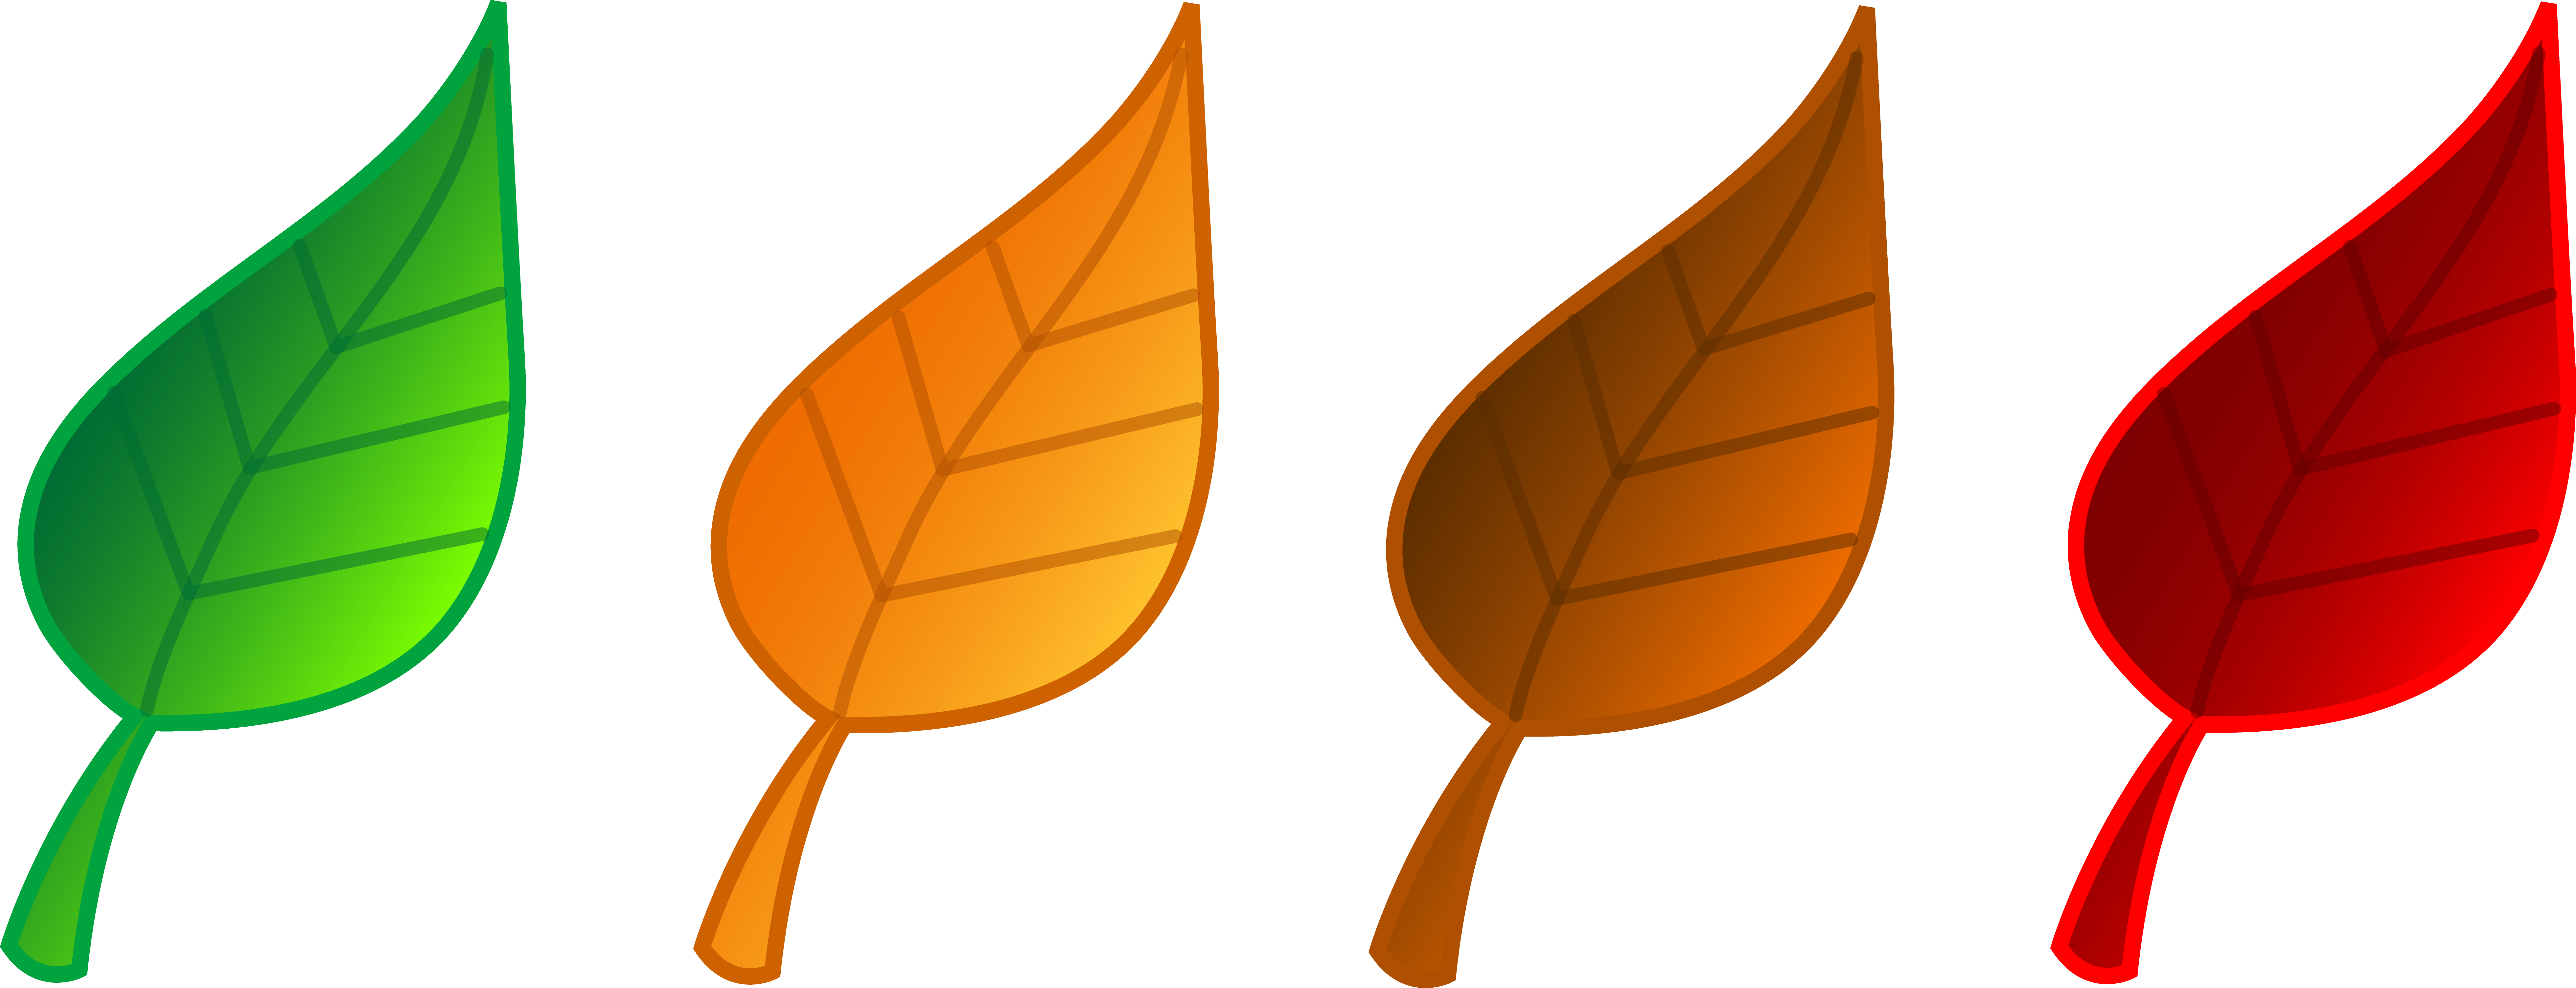 different-color-leaves-clip-art-clip-art-library